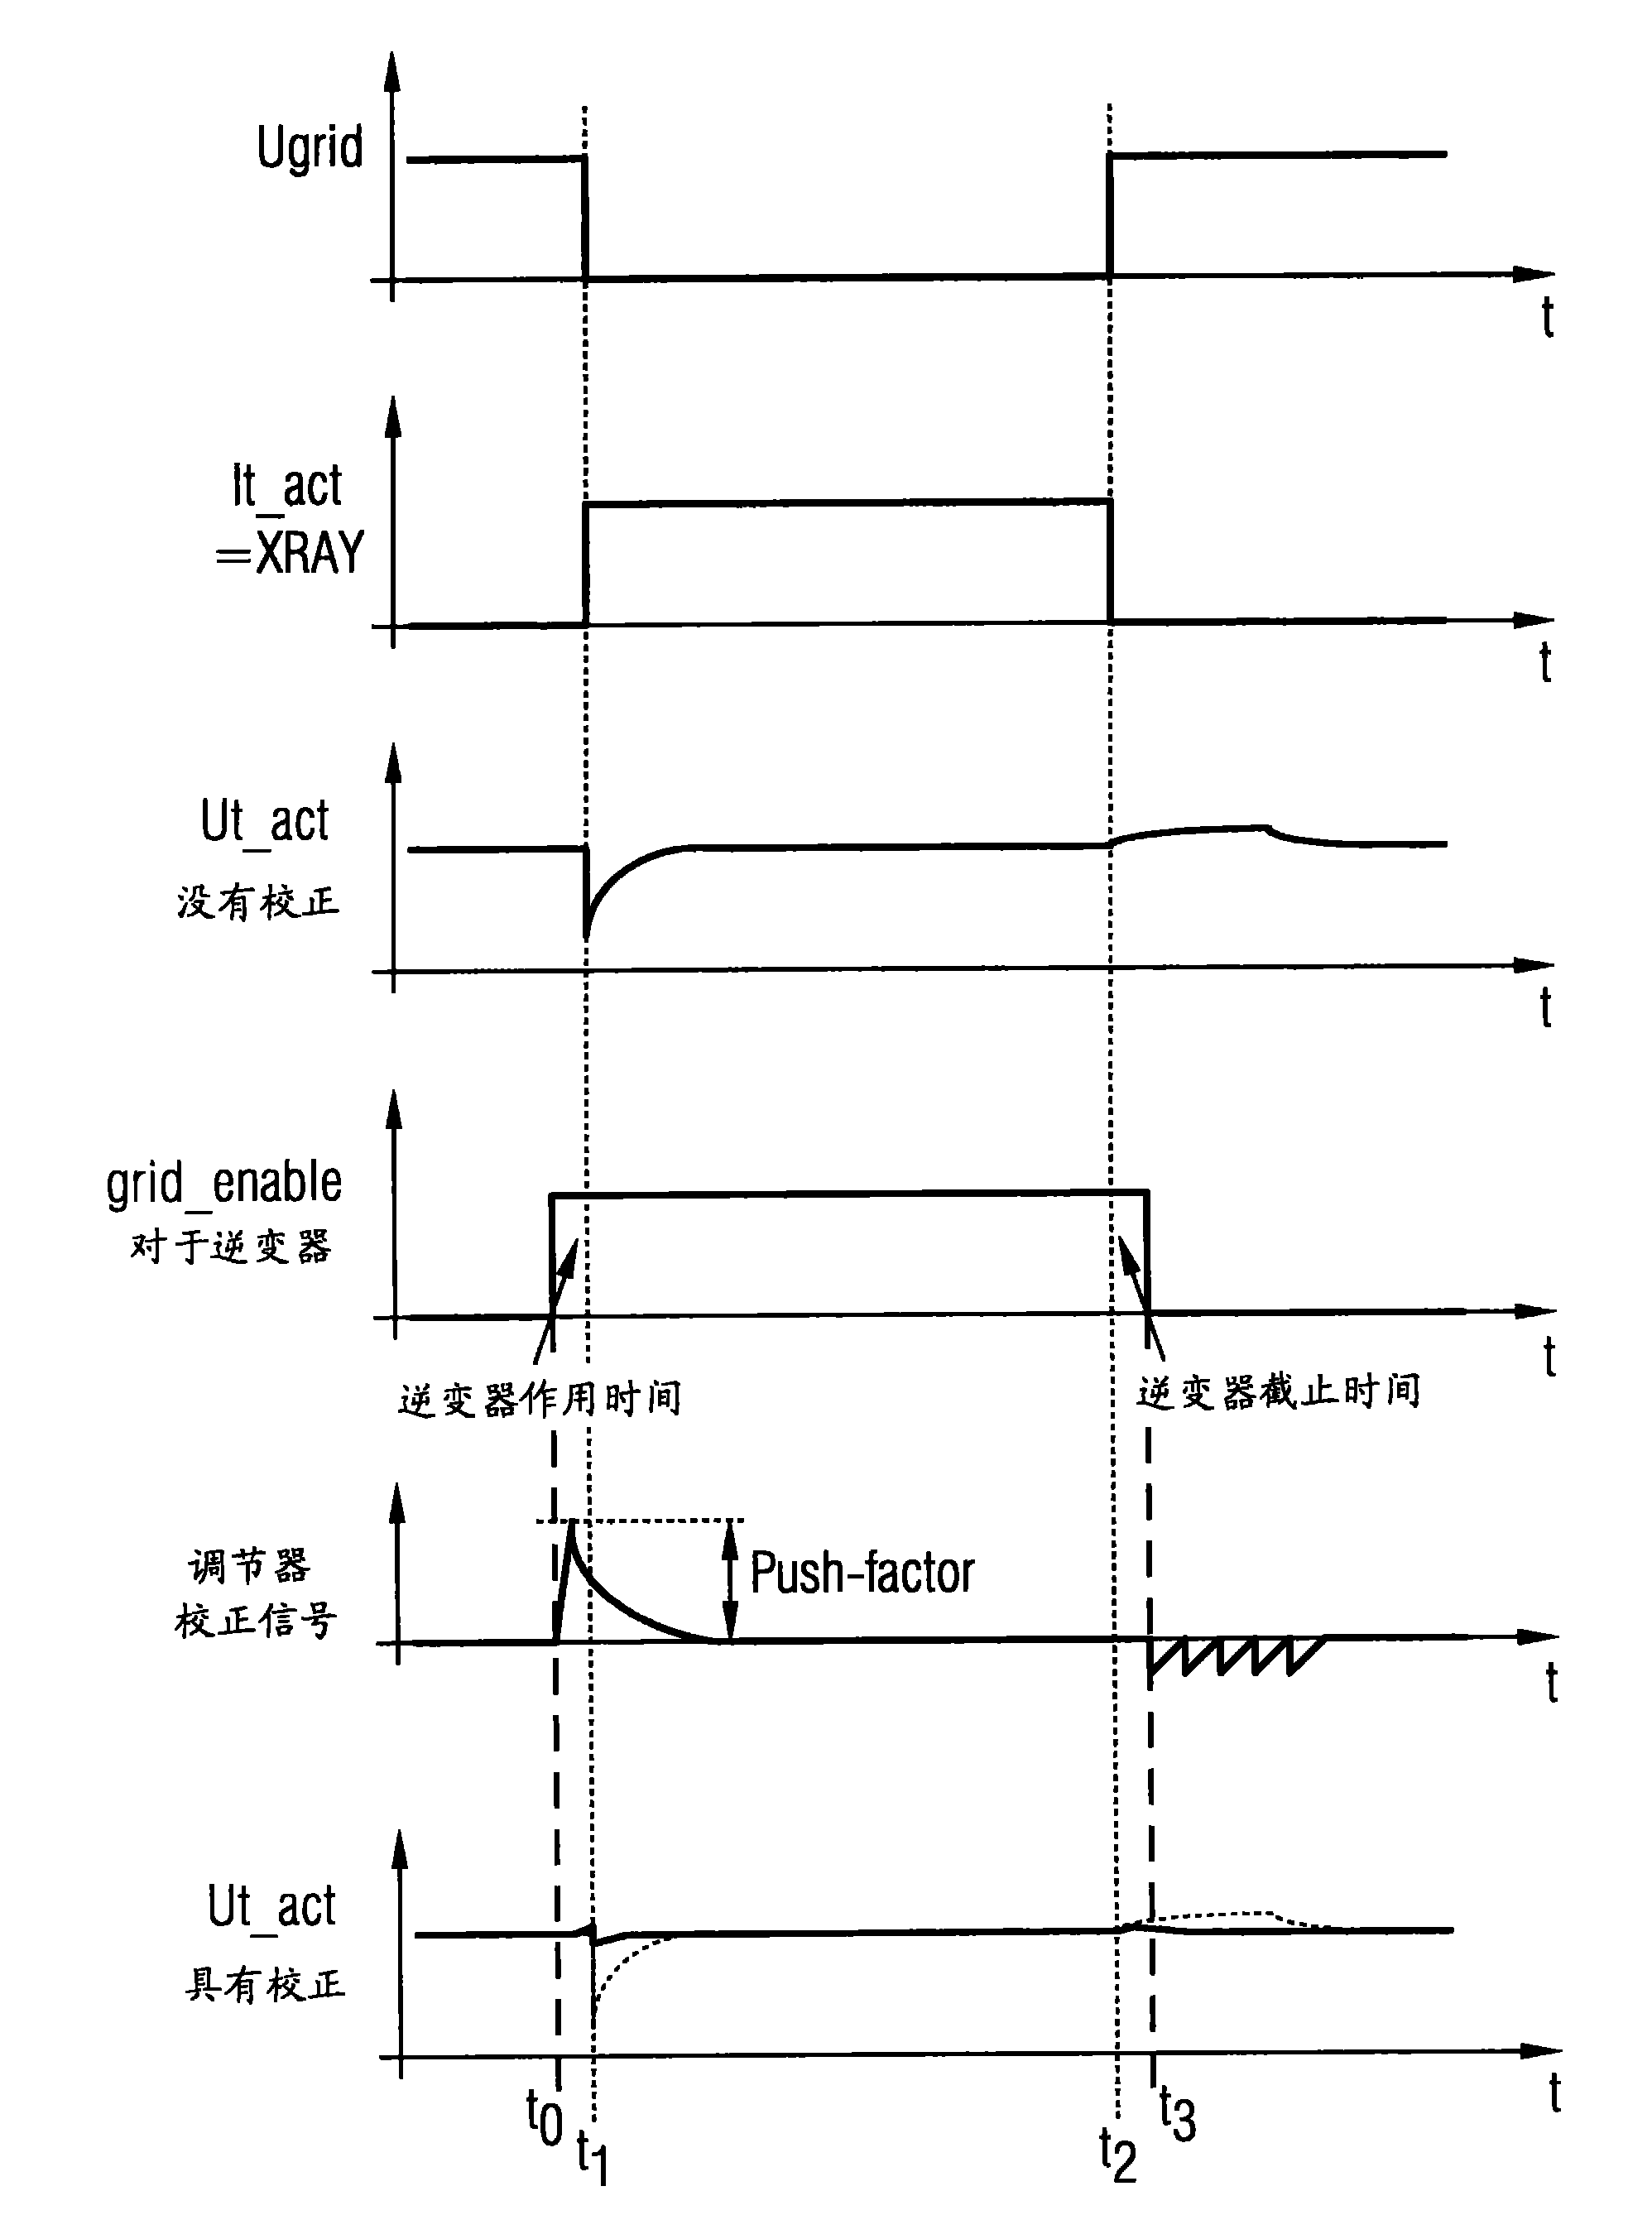 Voltage stabilization for grid-controlled x-ray tubes